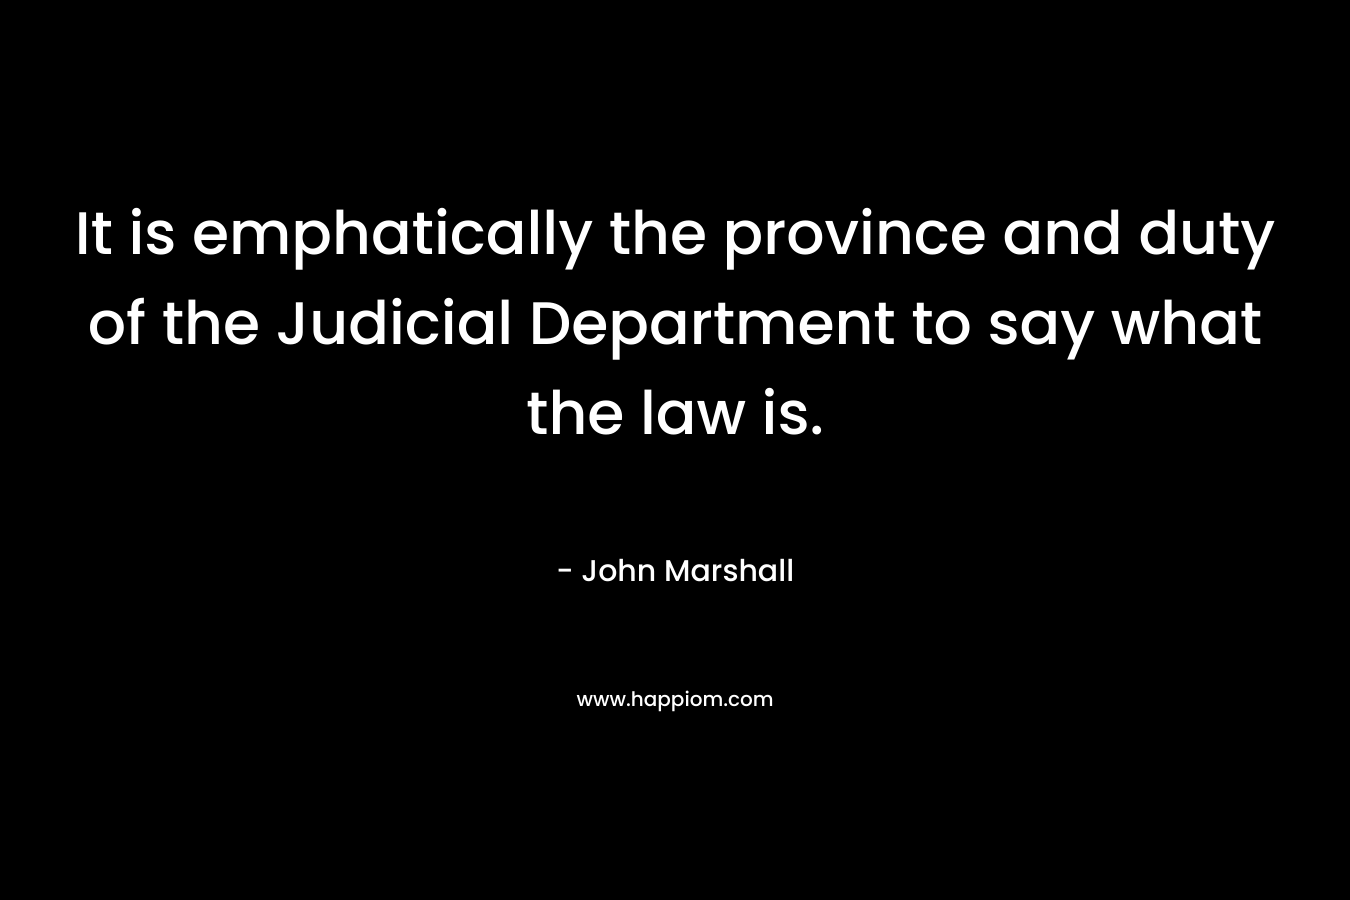 It is emphatically the province and duty of the Judicial Department to say what the law is. – John Marshall